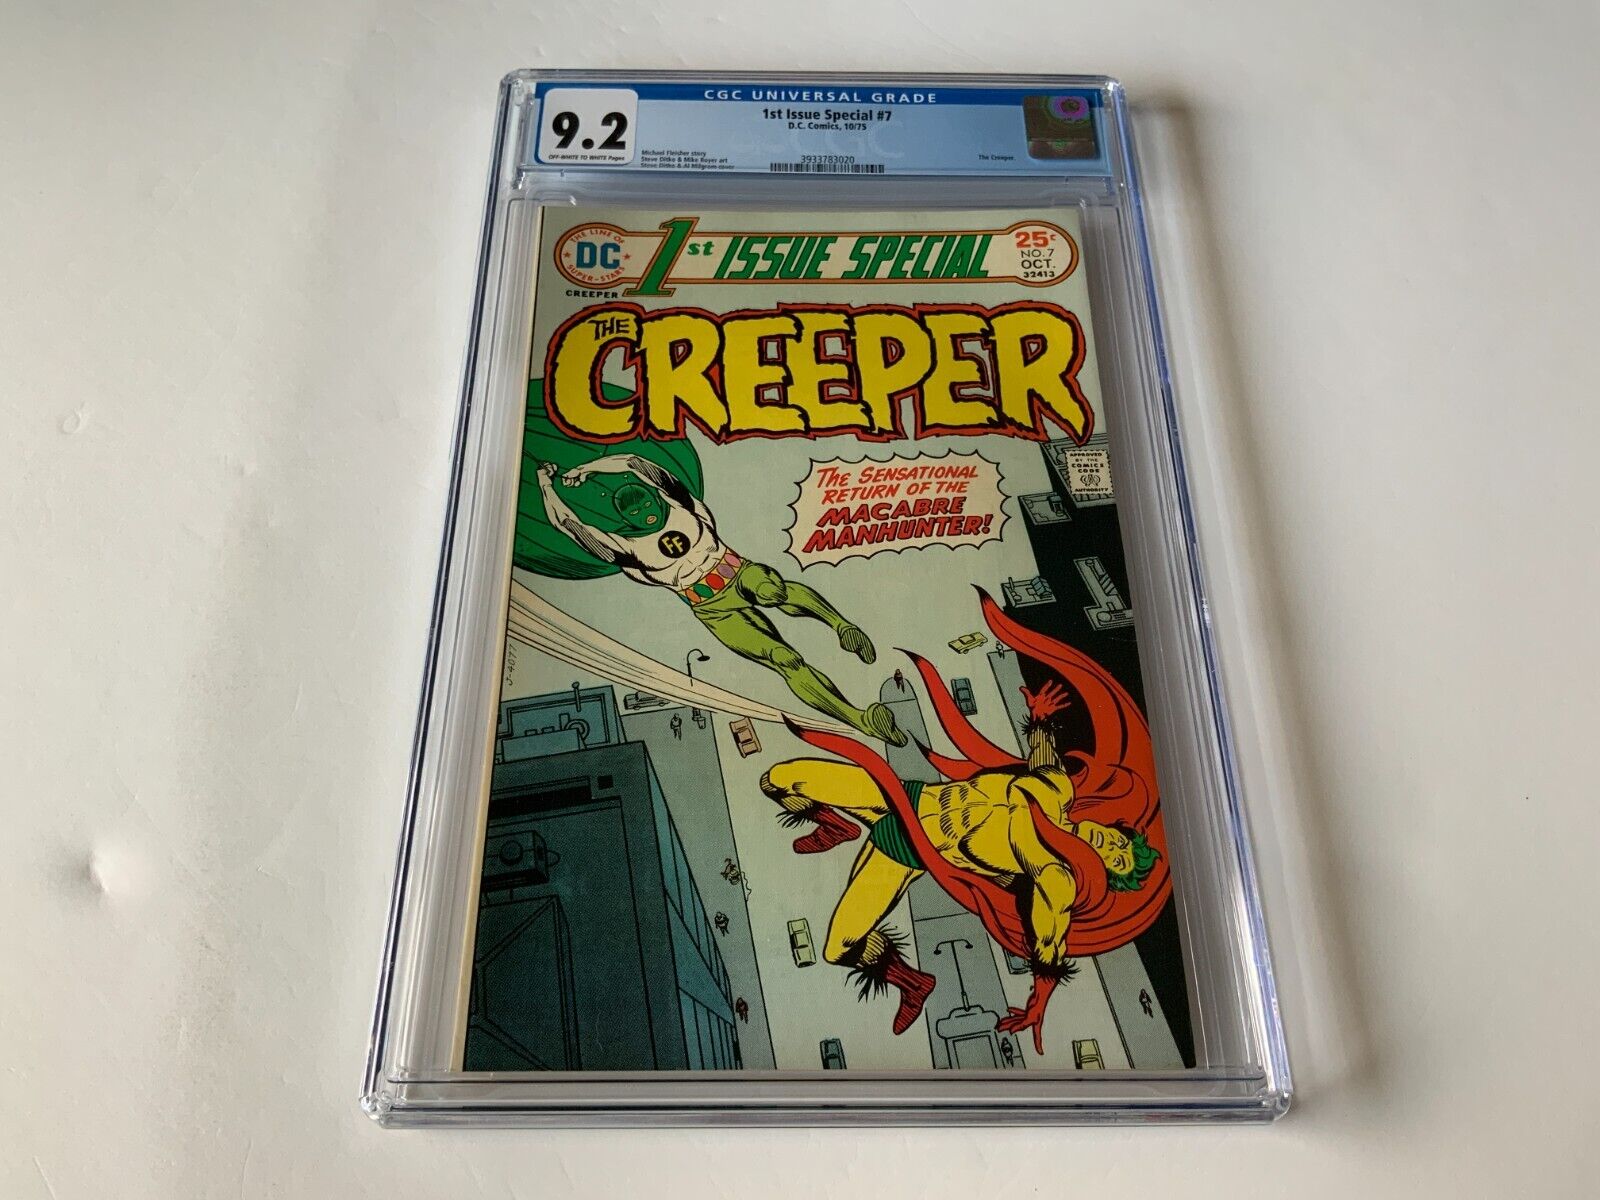 1ST ISSUE SPECIAL 7 CGC 9.2 THE CREEPER STEVE DITKO DC COMICS 1975